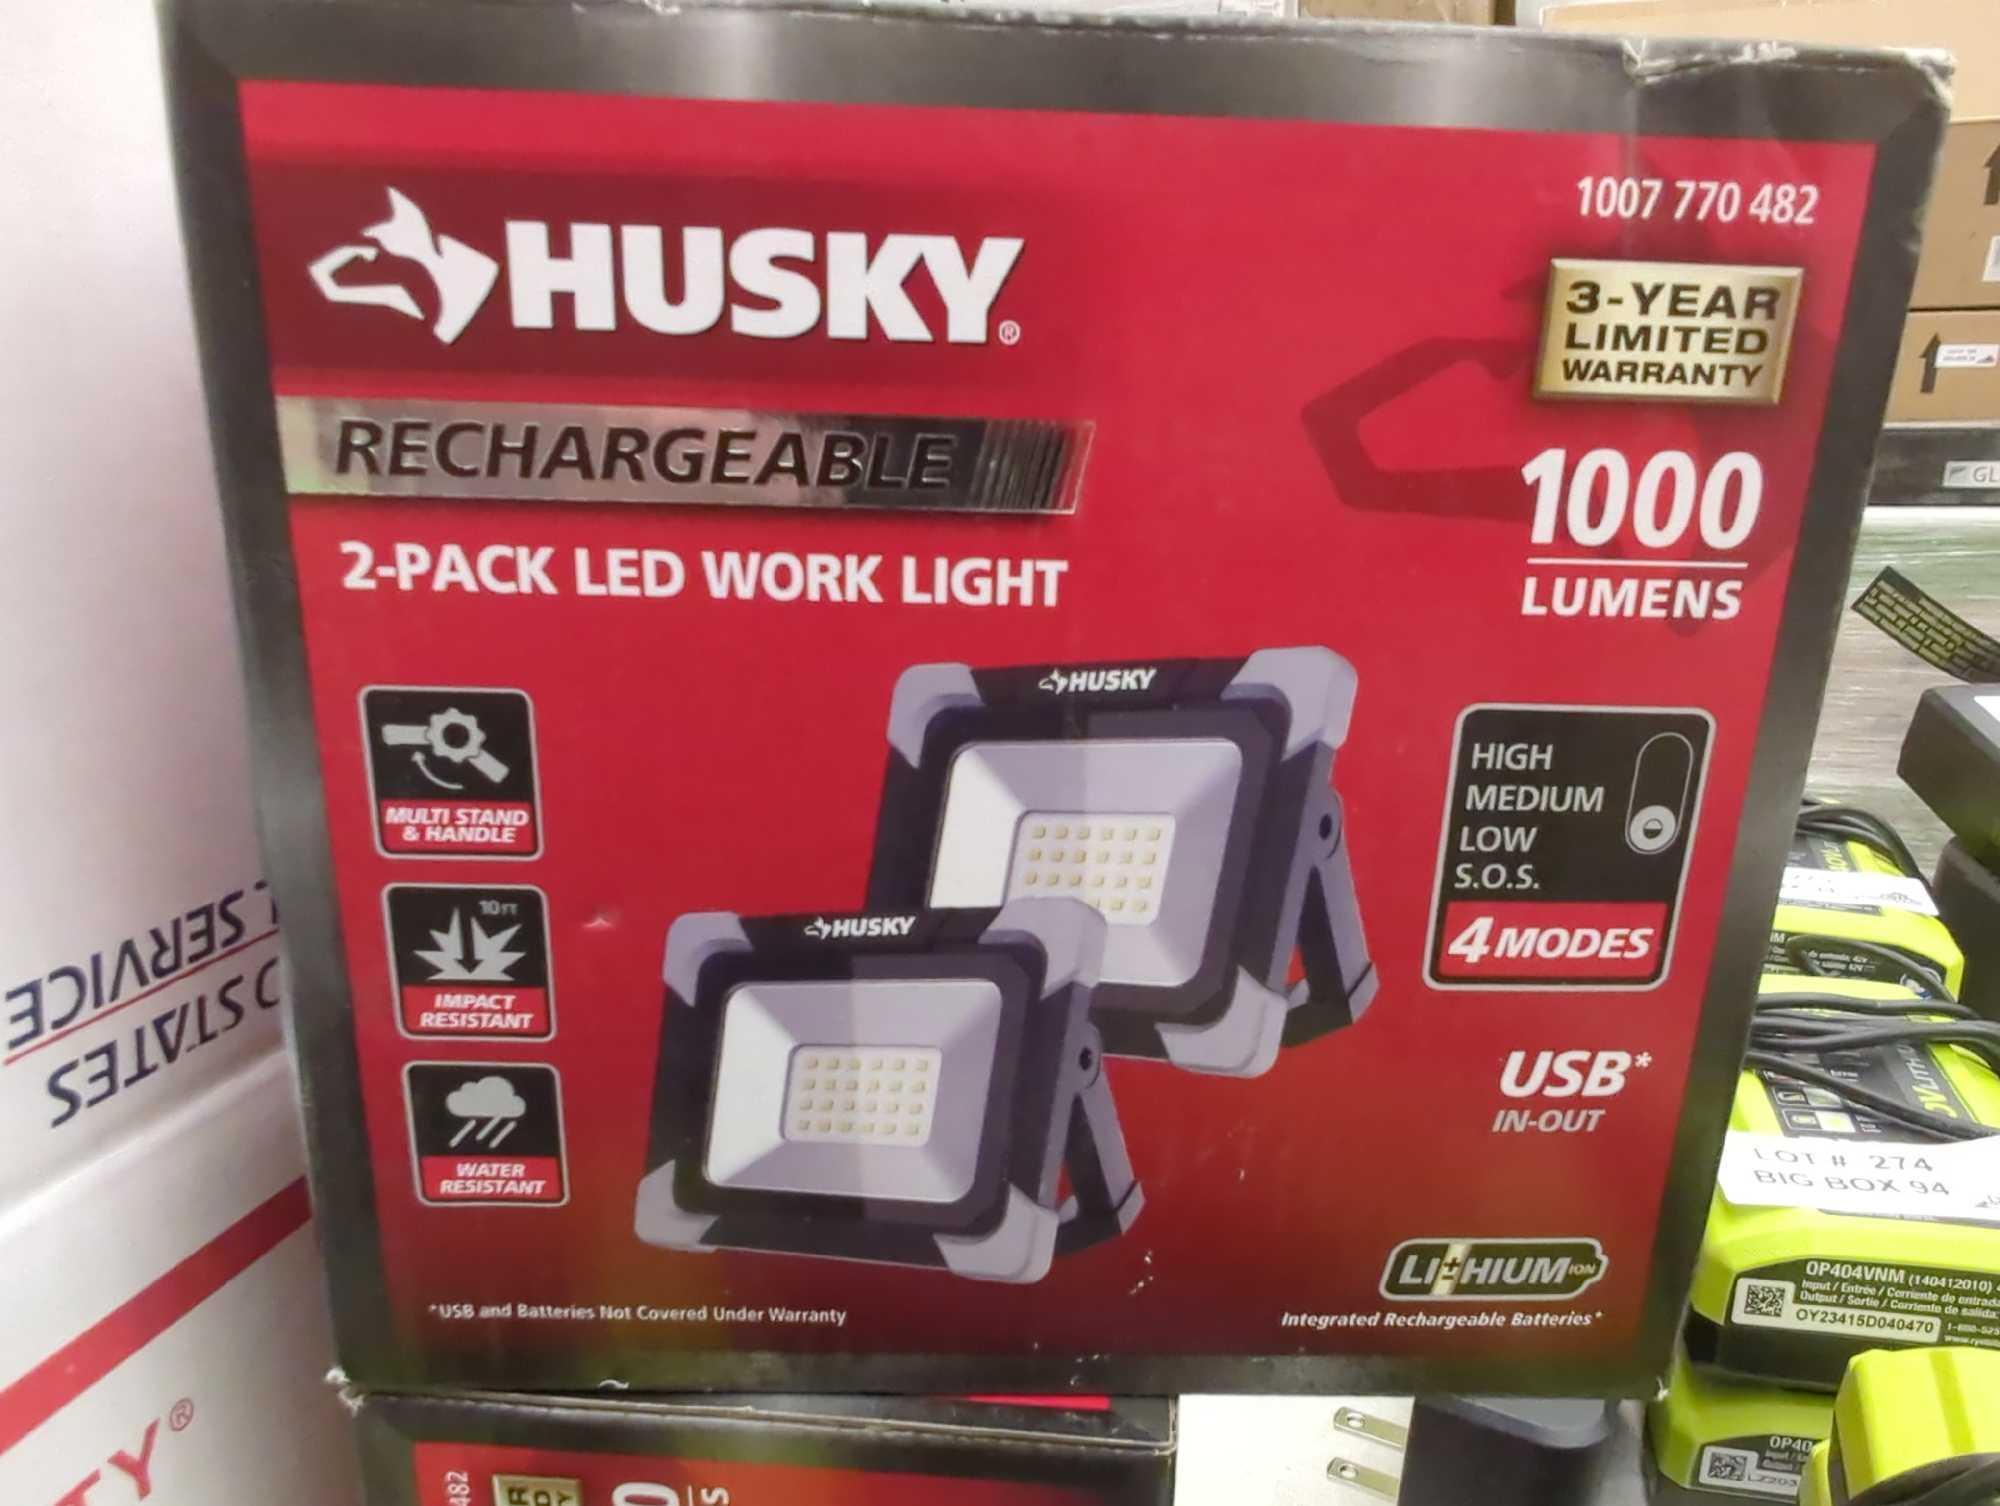 Lot of 2 Husky 1000 Lumen Rechargeable Work Light (2-Pack), Appears to be New in Factory Sealed Box